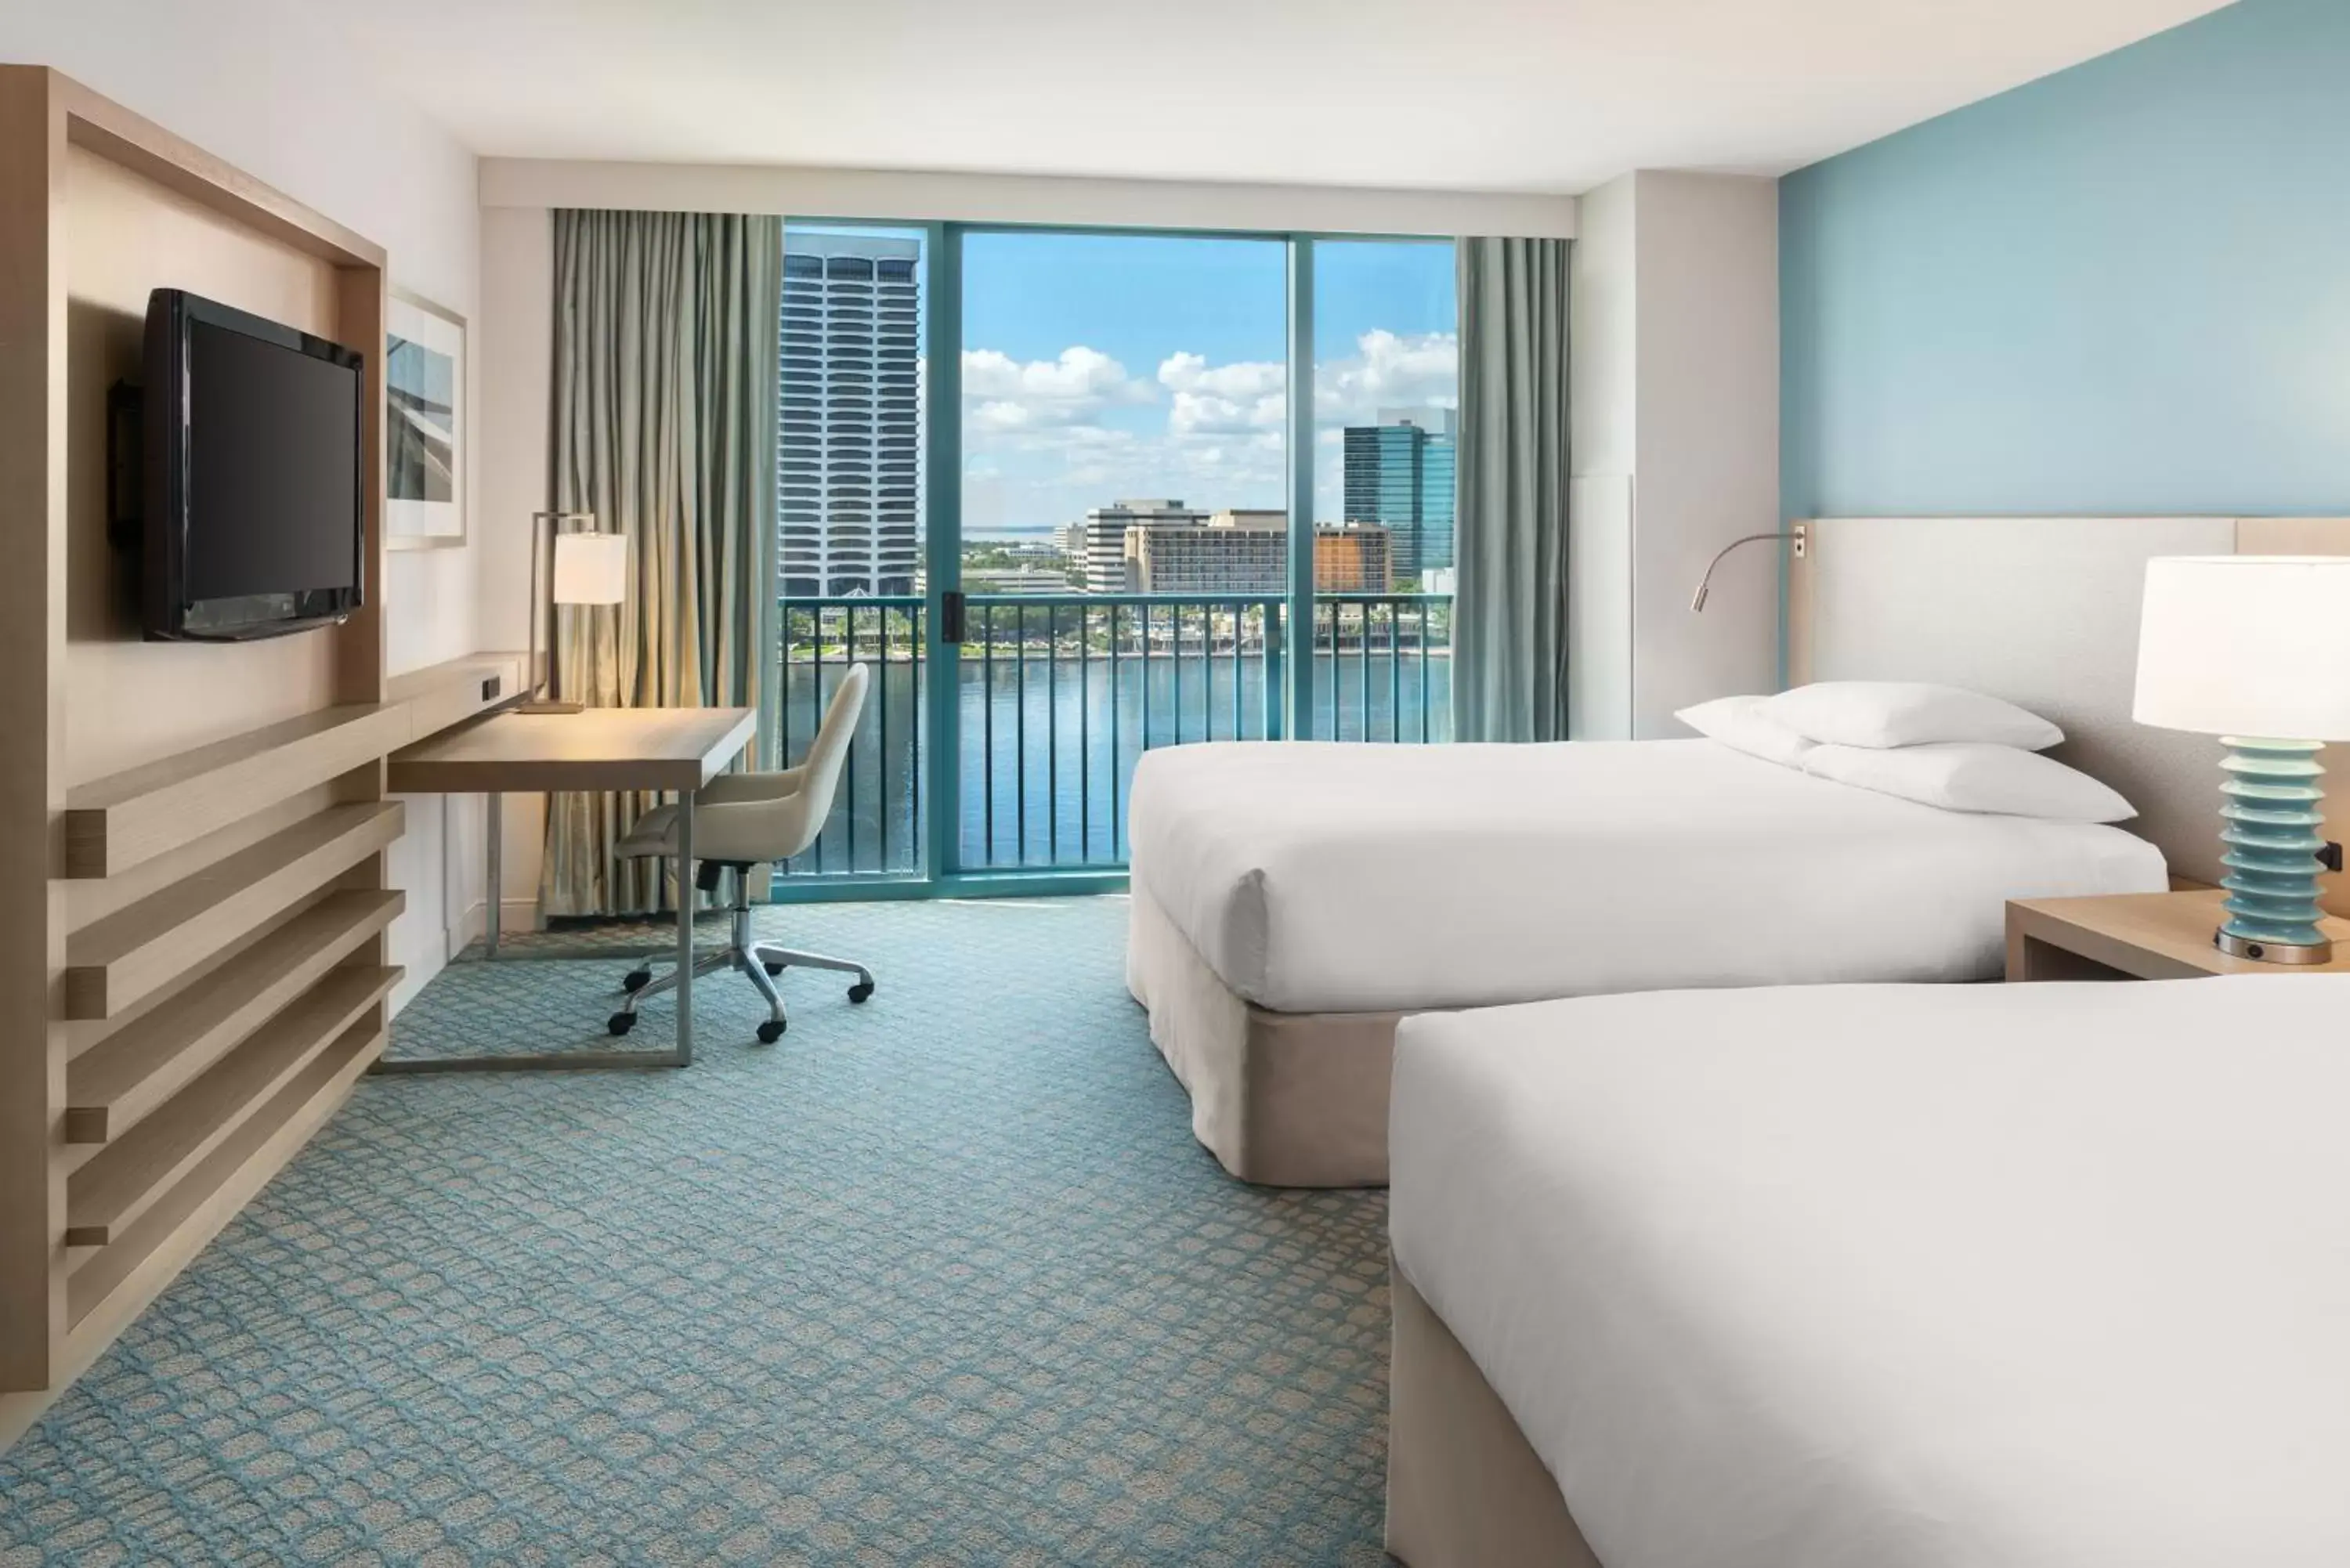 Queen Room with Two Queen Beds and River View - single occupancy in Hyatt Regency Jacksonville Riverfront